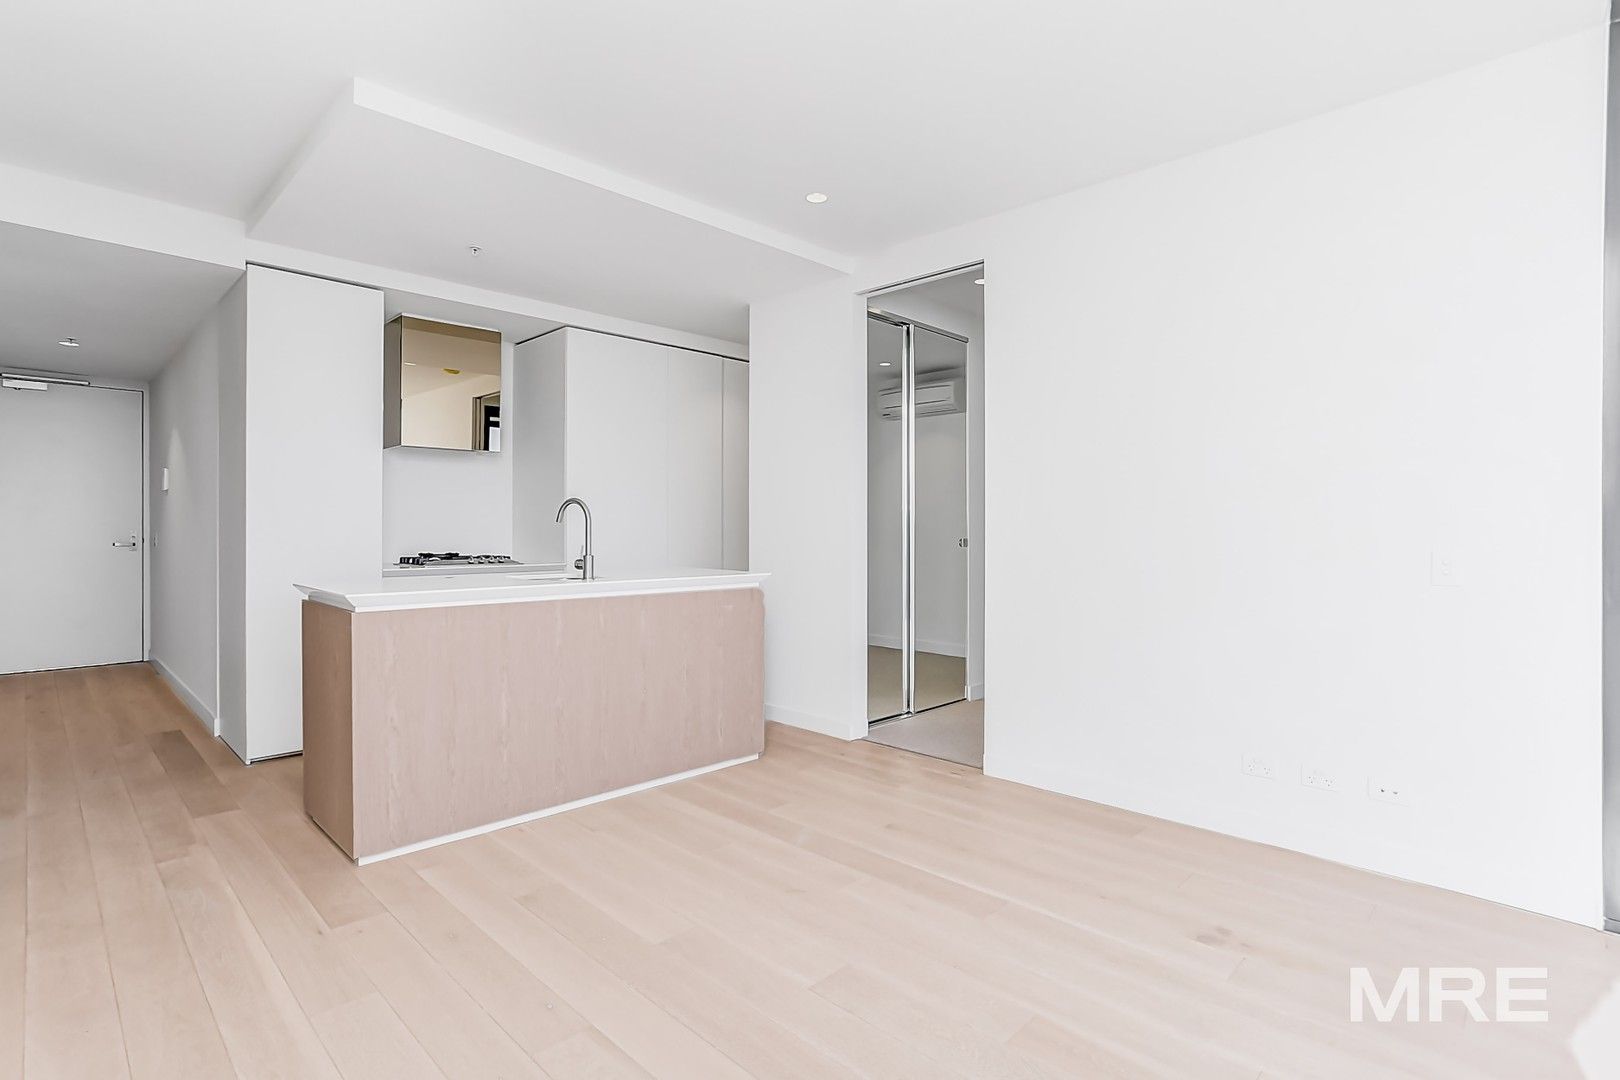 2 bedrooms Apartment / Unit / Flat in 4005/135 A'Beckett Street MELBOURNE VIC, 3000